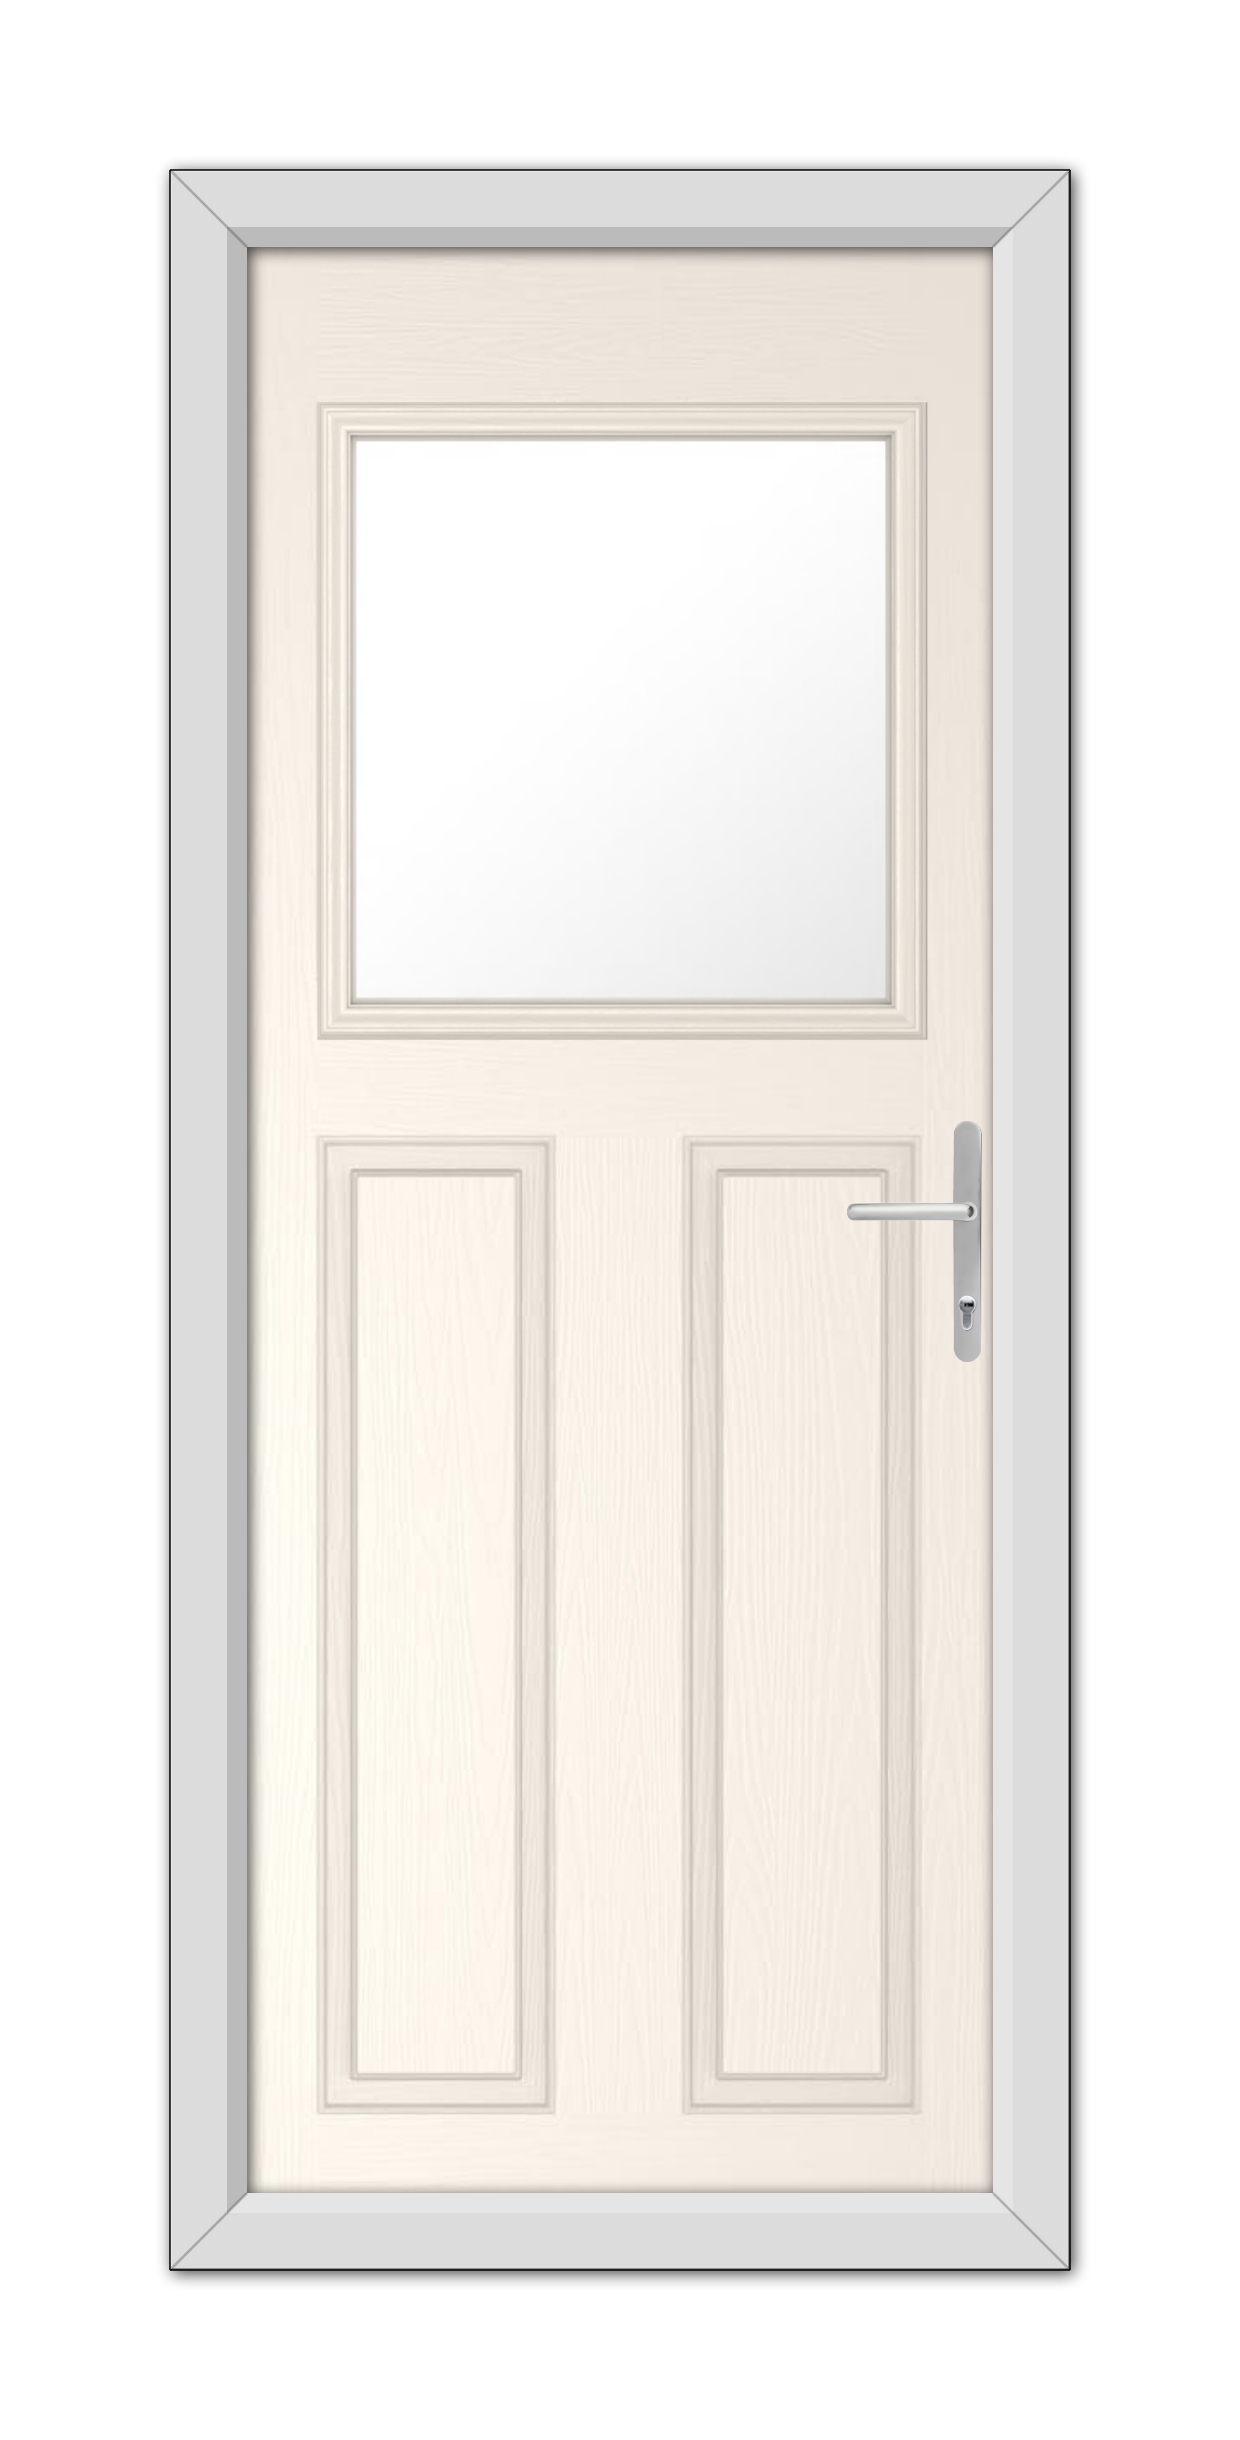 A White Foil Axwell Composite Door 48mm Timber Core with a square glass window at the top and a metallic door handle, set within a gray frame.